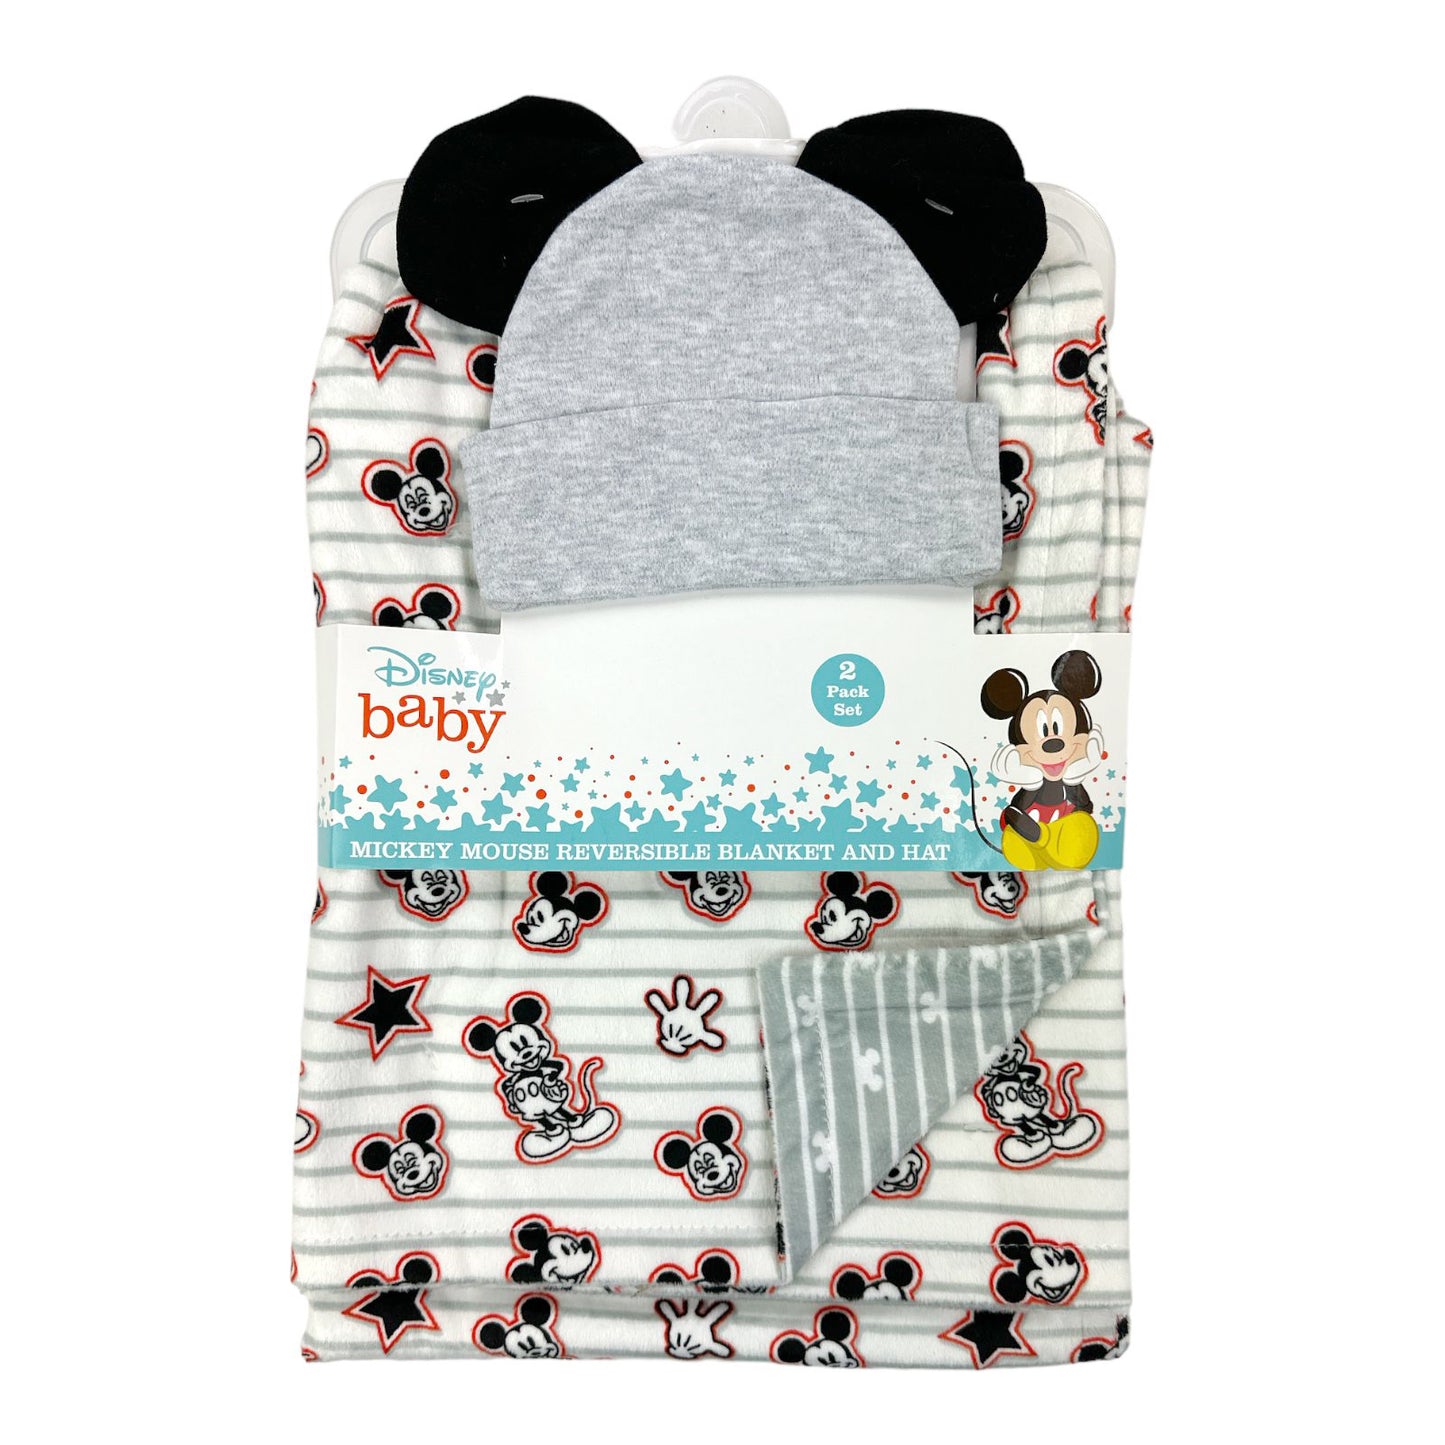 MICKEY MOUSE Soft Lightweight Baby Blanket w/ Hat (Pack of 4)